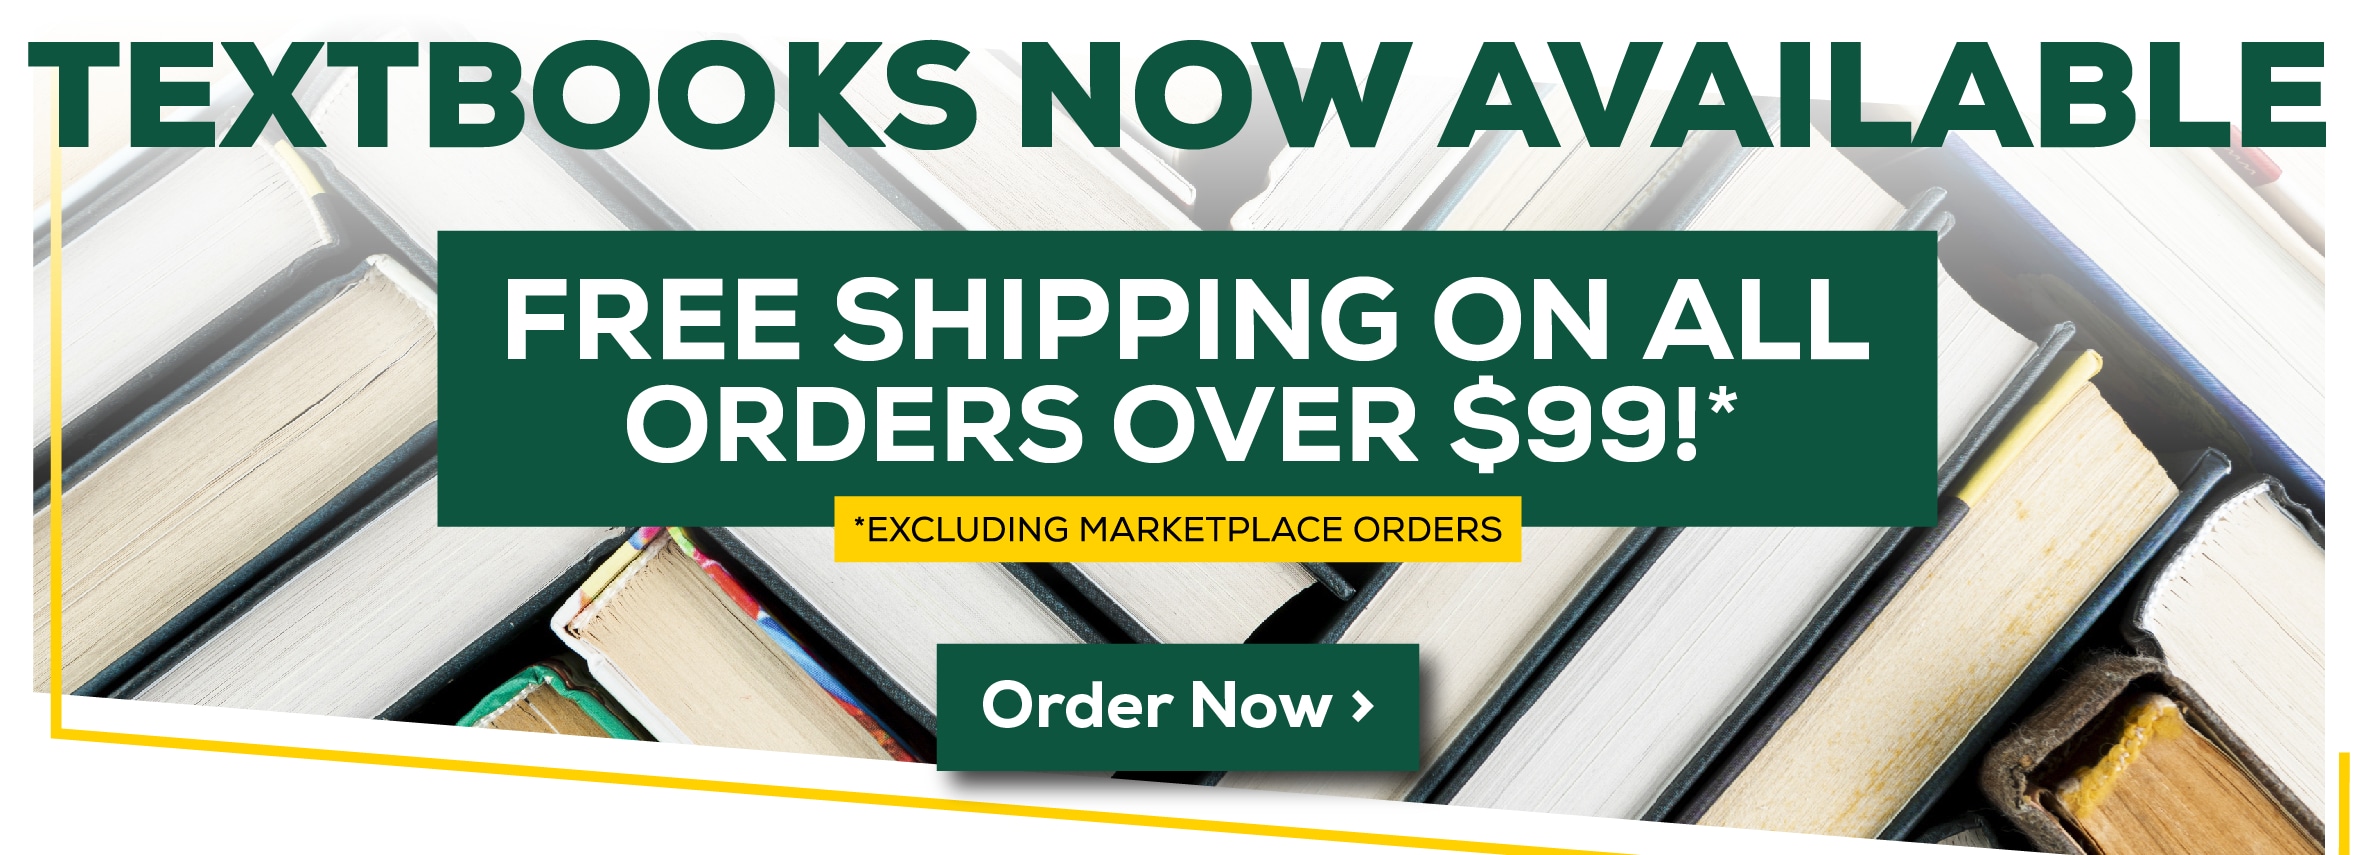 TEXTBOOKS NOW AVAILABLE FREE SHIPPING ON ALL ORDERS OVER $99!* *EXCLUDING MARKETPLACE ORDERS Order Now >